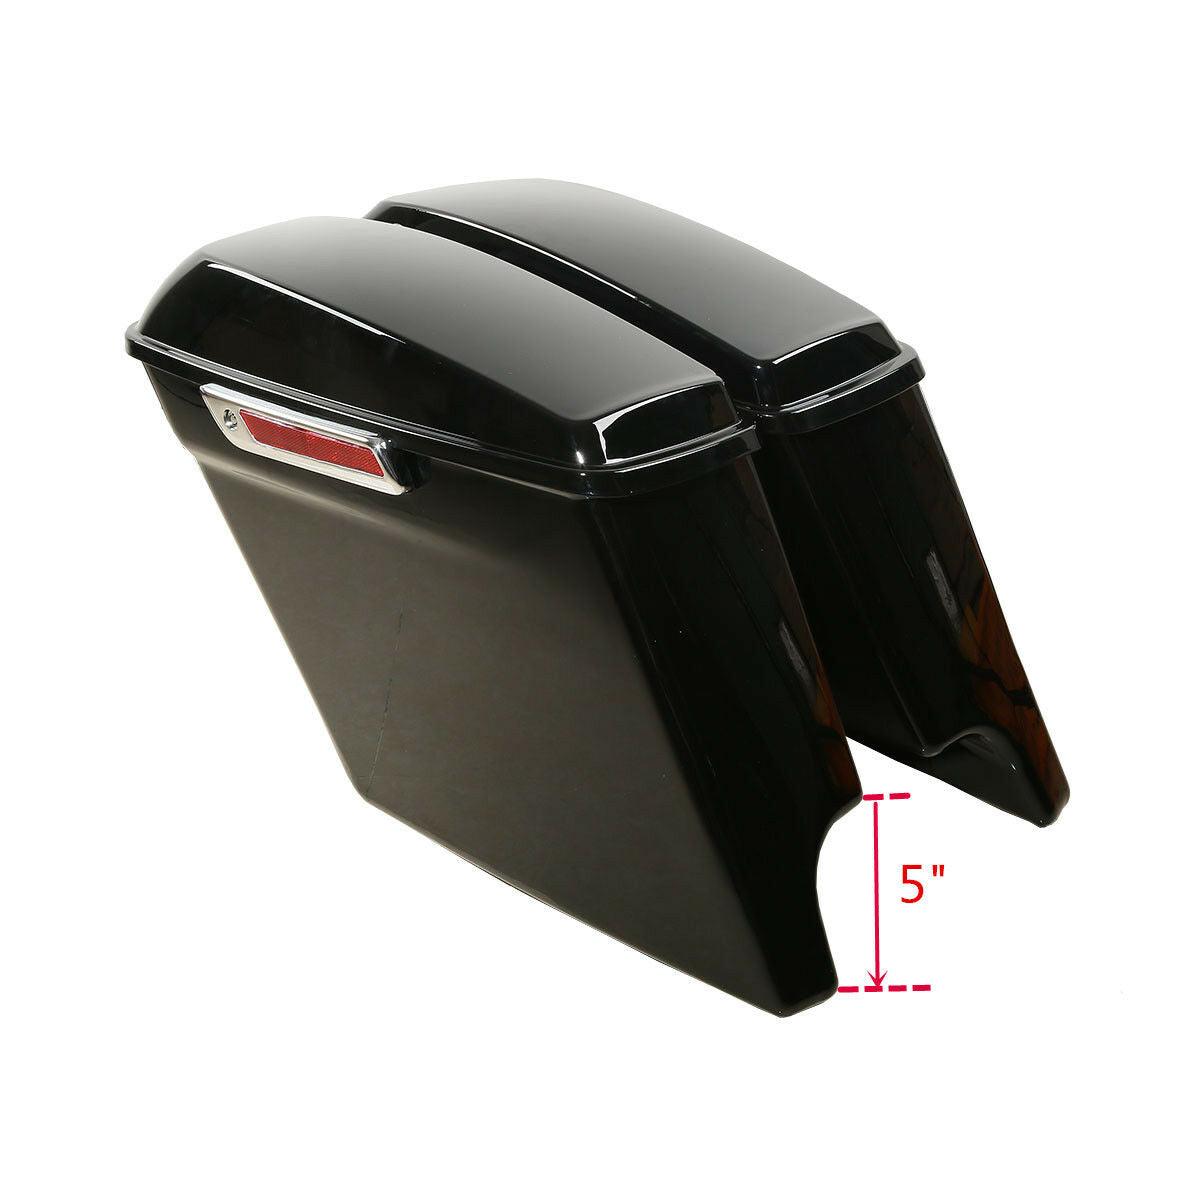 5" Stretched Extended Saddlebags Saddle Bags For Harley Touring Road Glide 14-22 - Moto Life Products